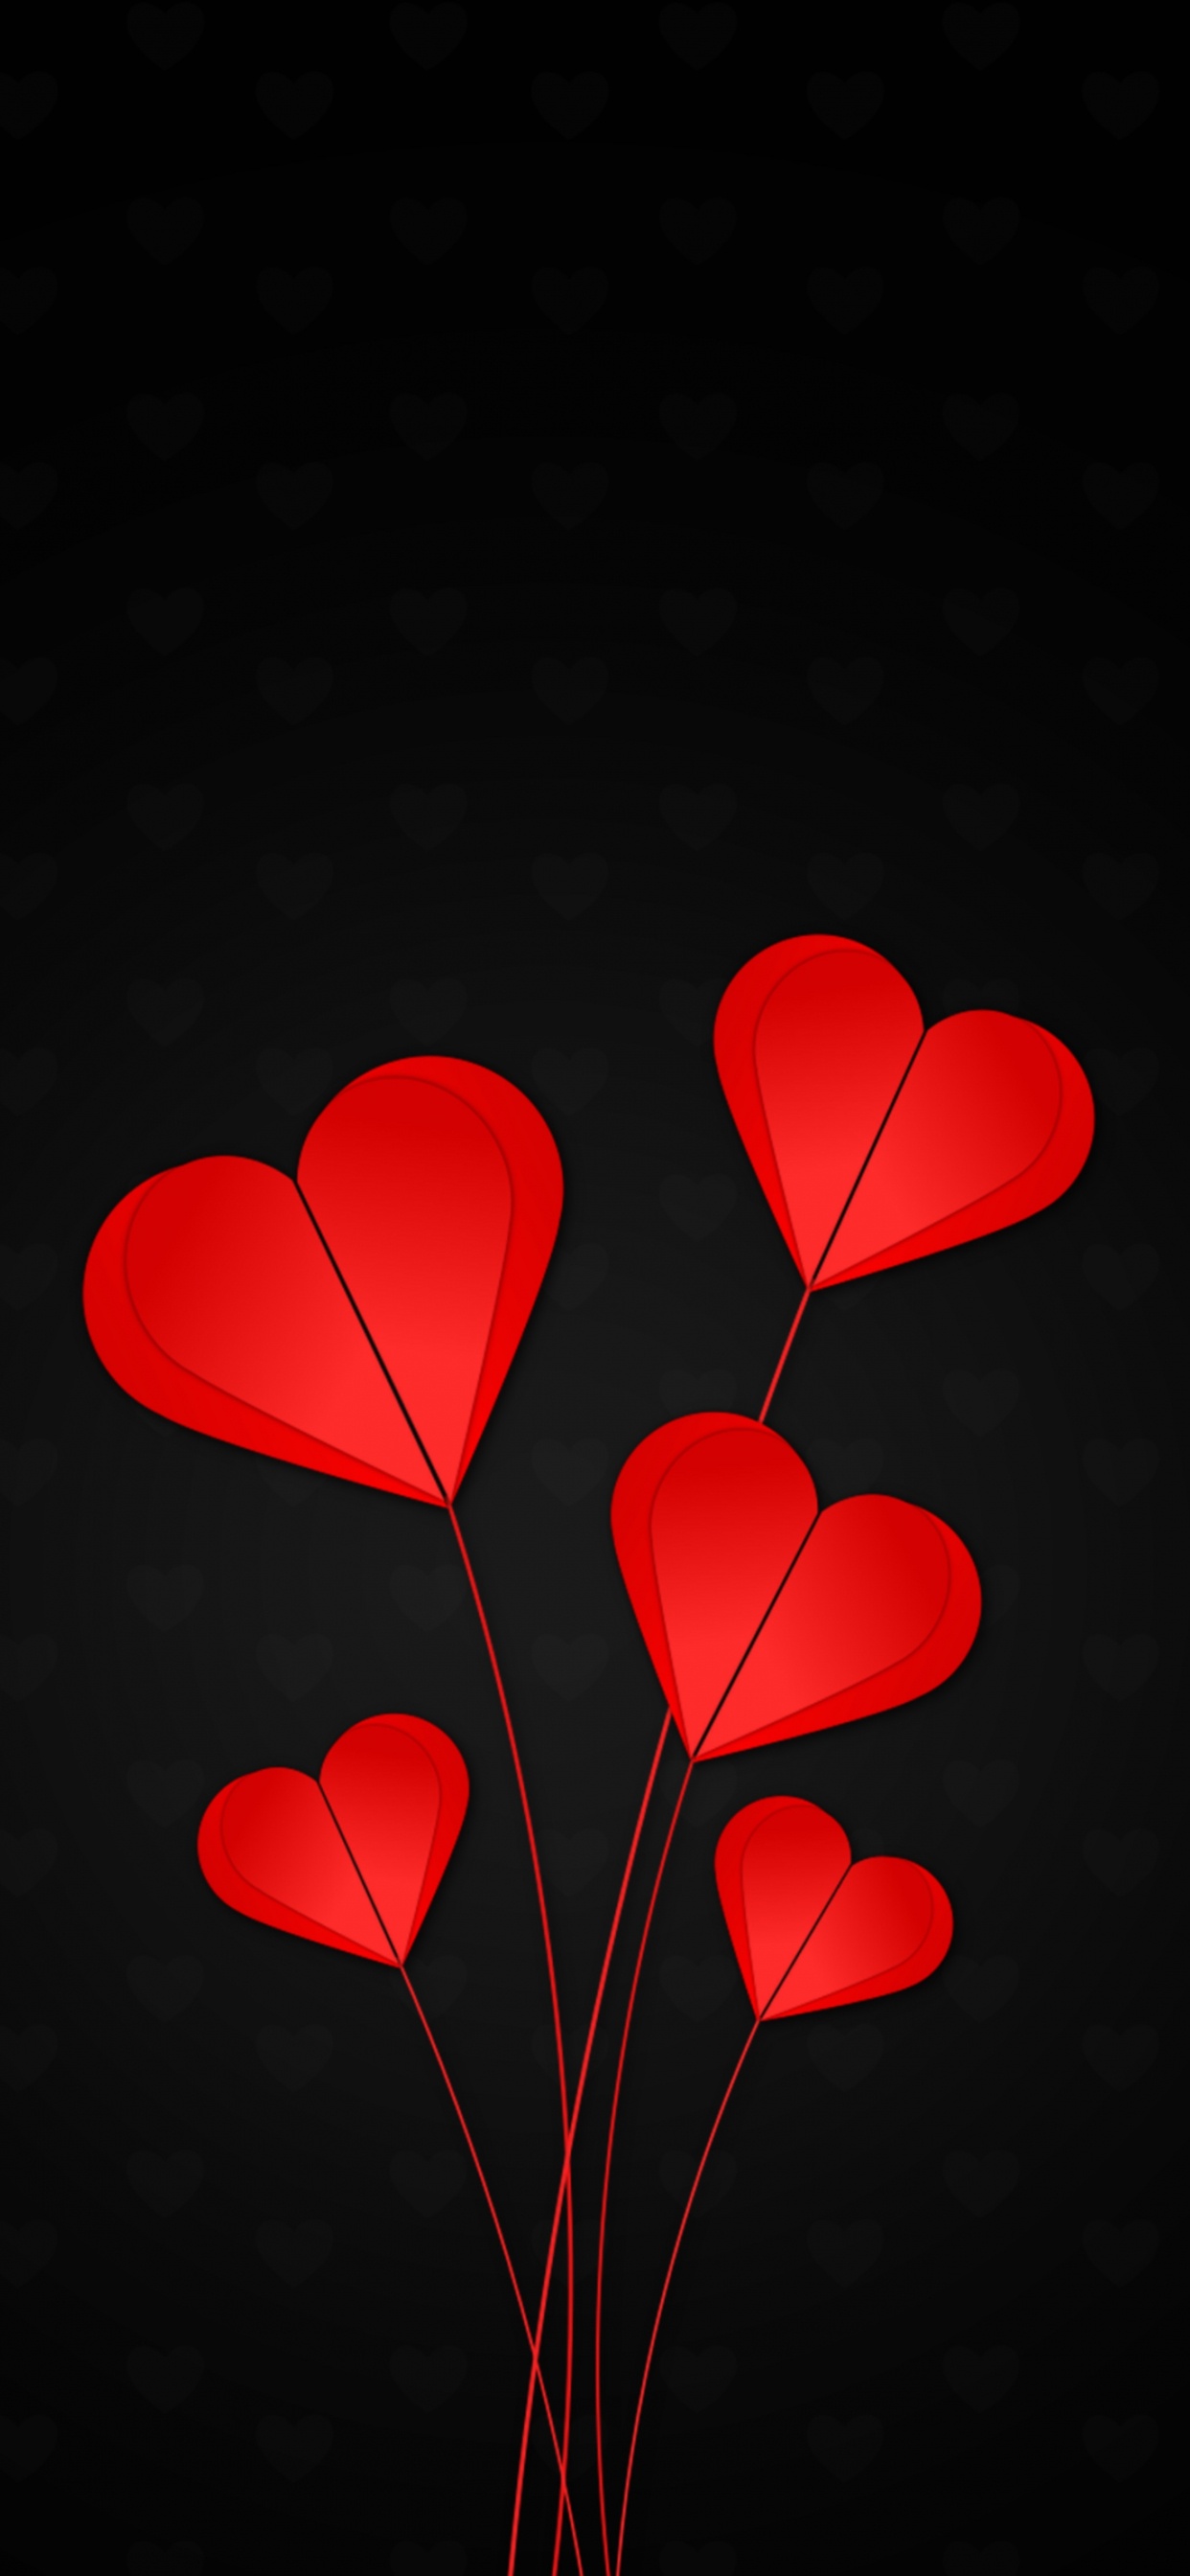 Heart, Red, Petal, Love, Valentines Day. Wallpaper in 1242x2688 Resolution